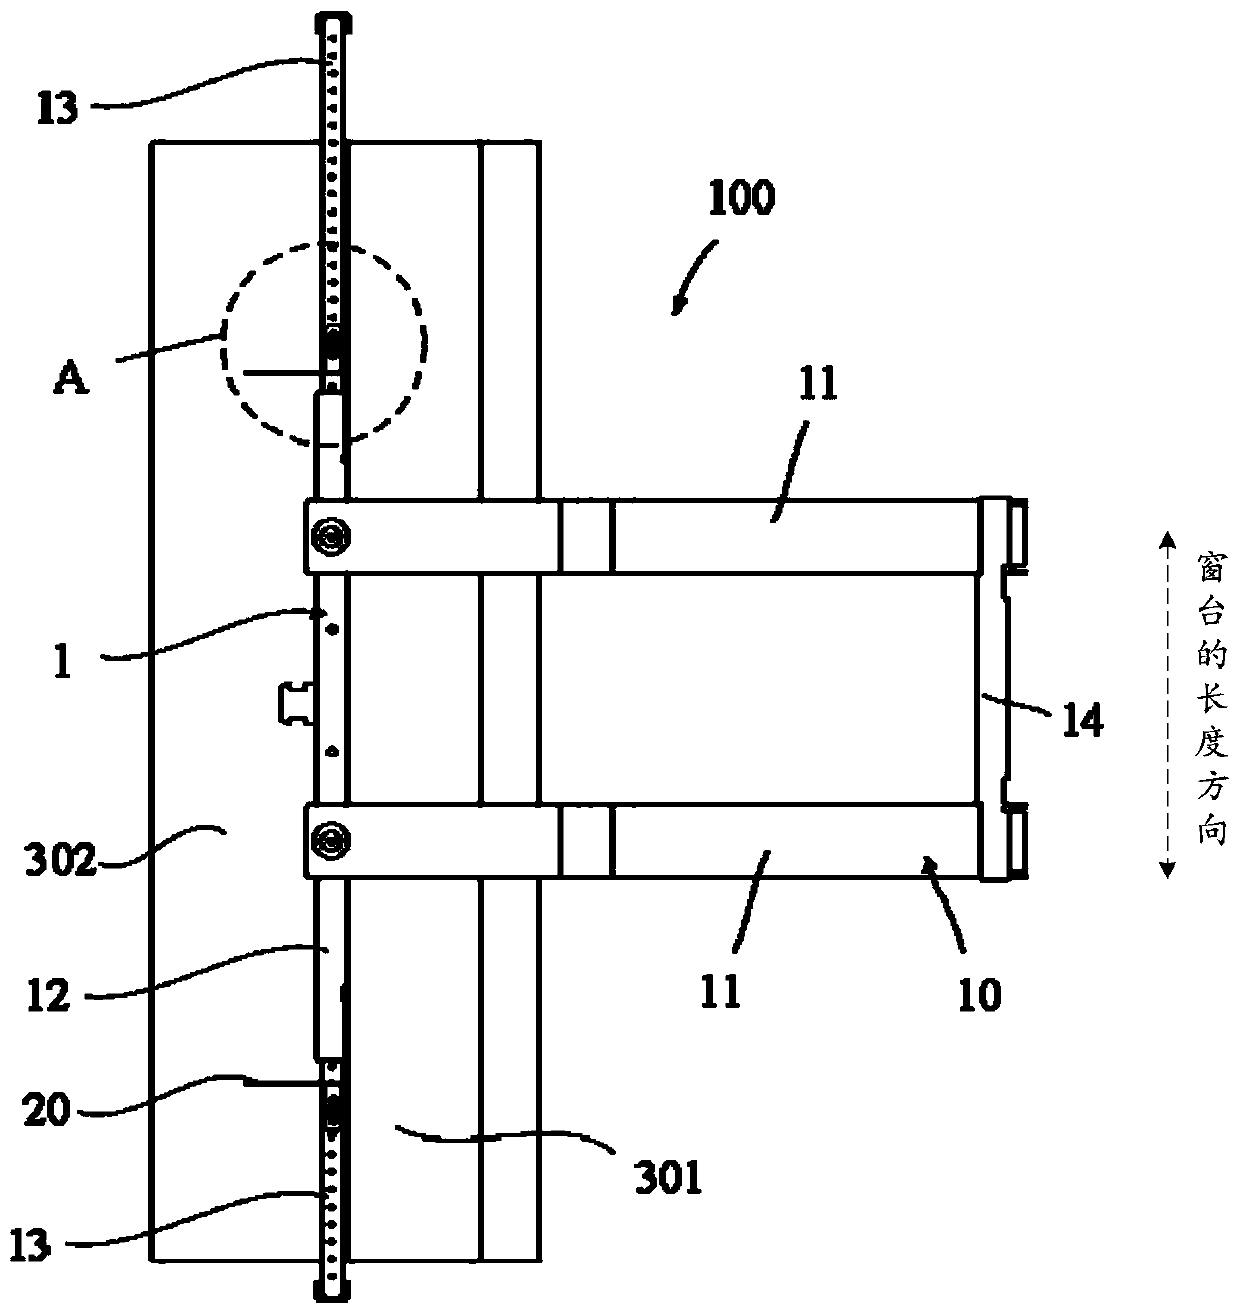 Connecting piece, installing frame assembly and window type air conditioner assembly